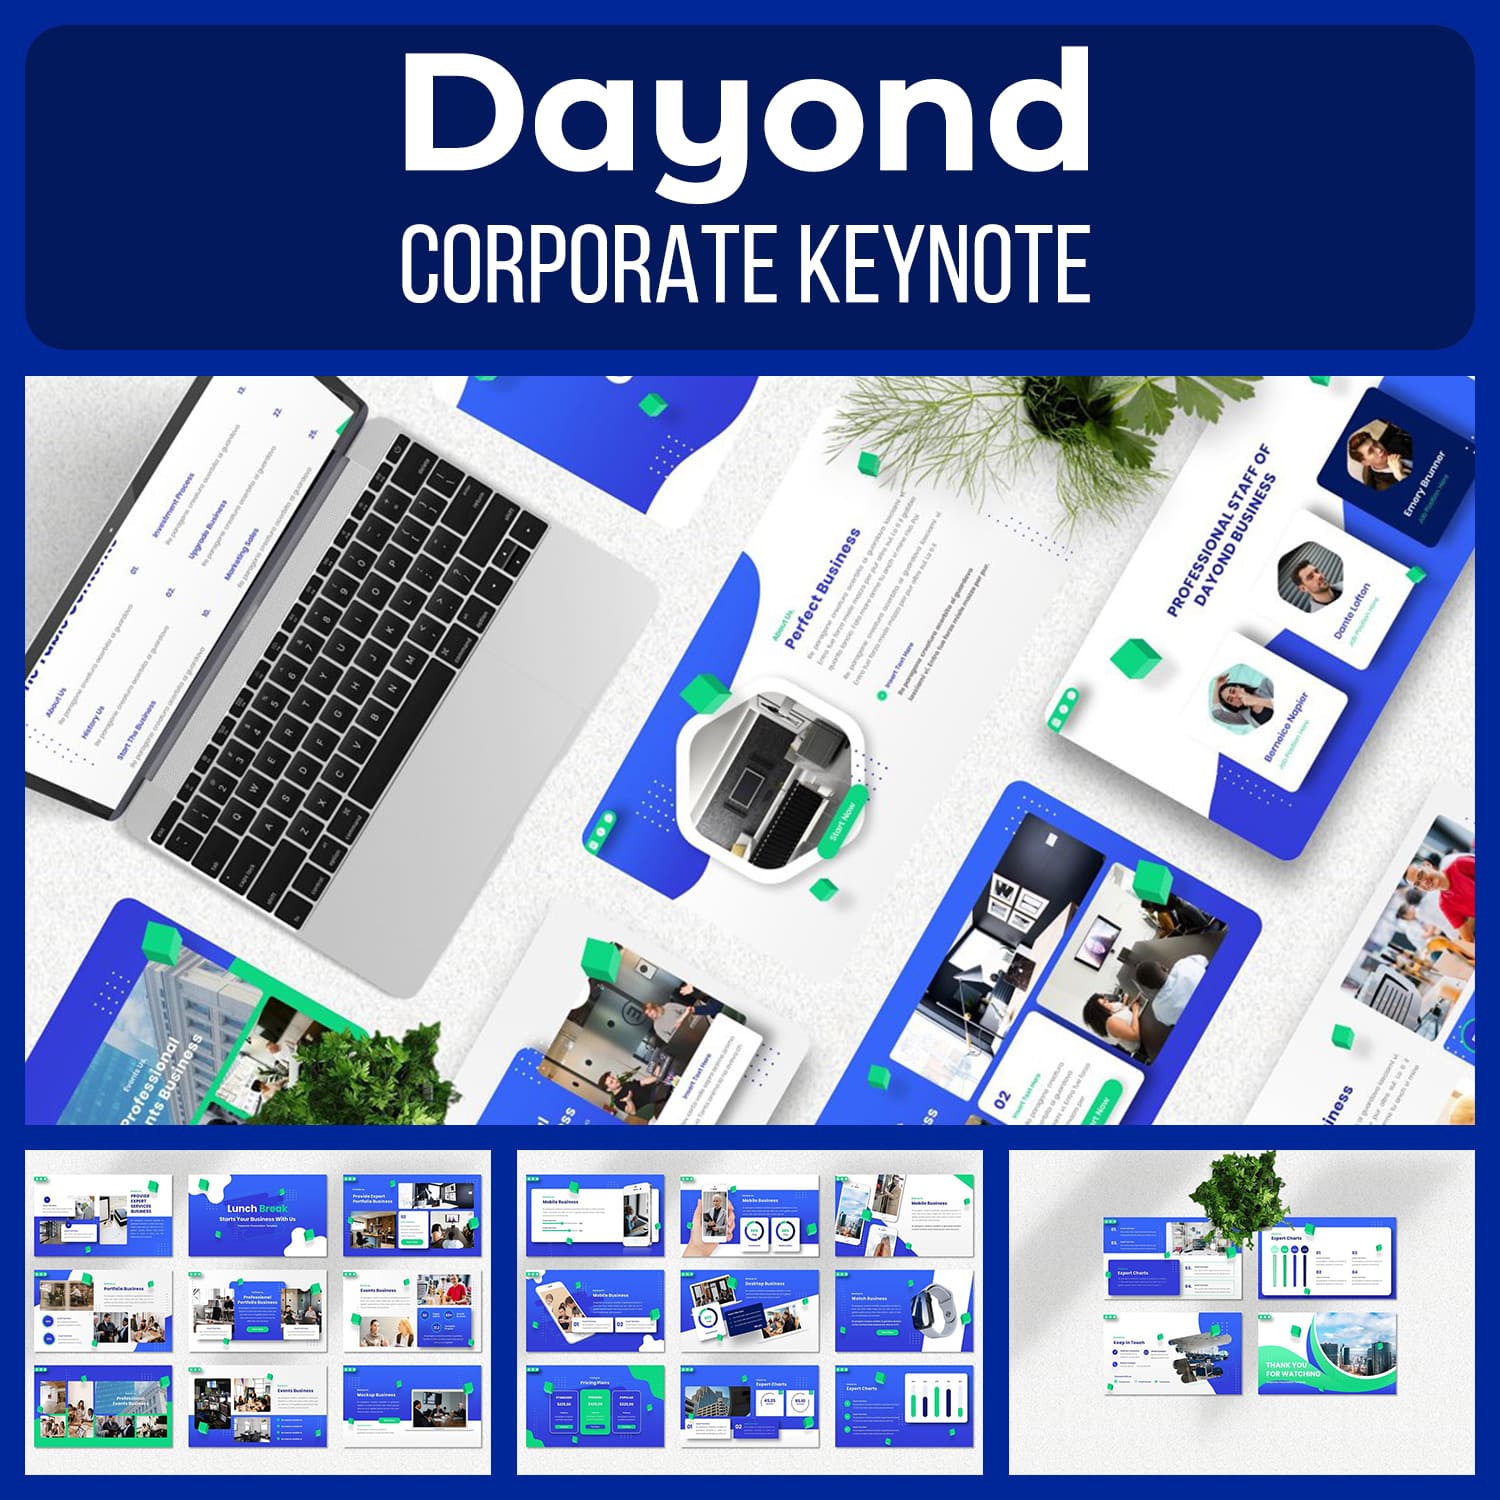 Dayond - Corporate Keynote main cover.